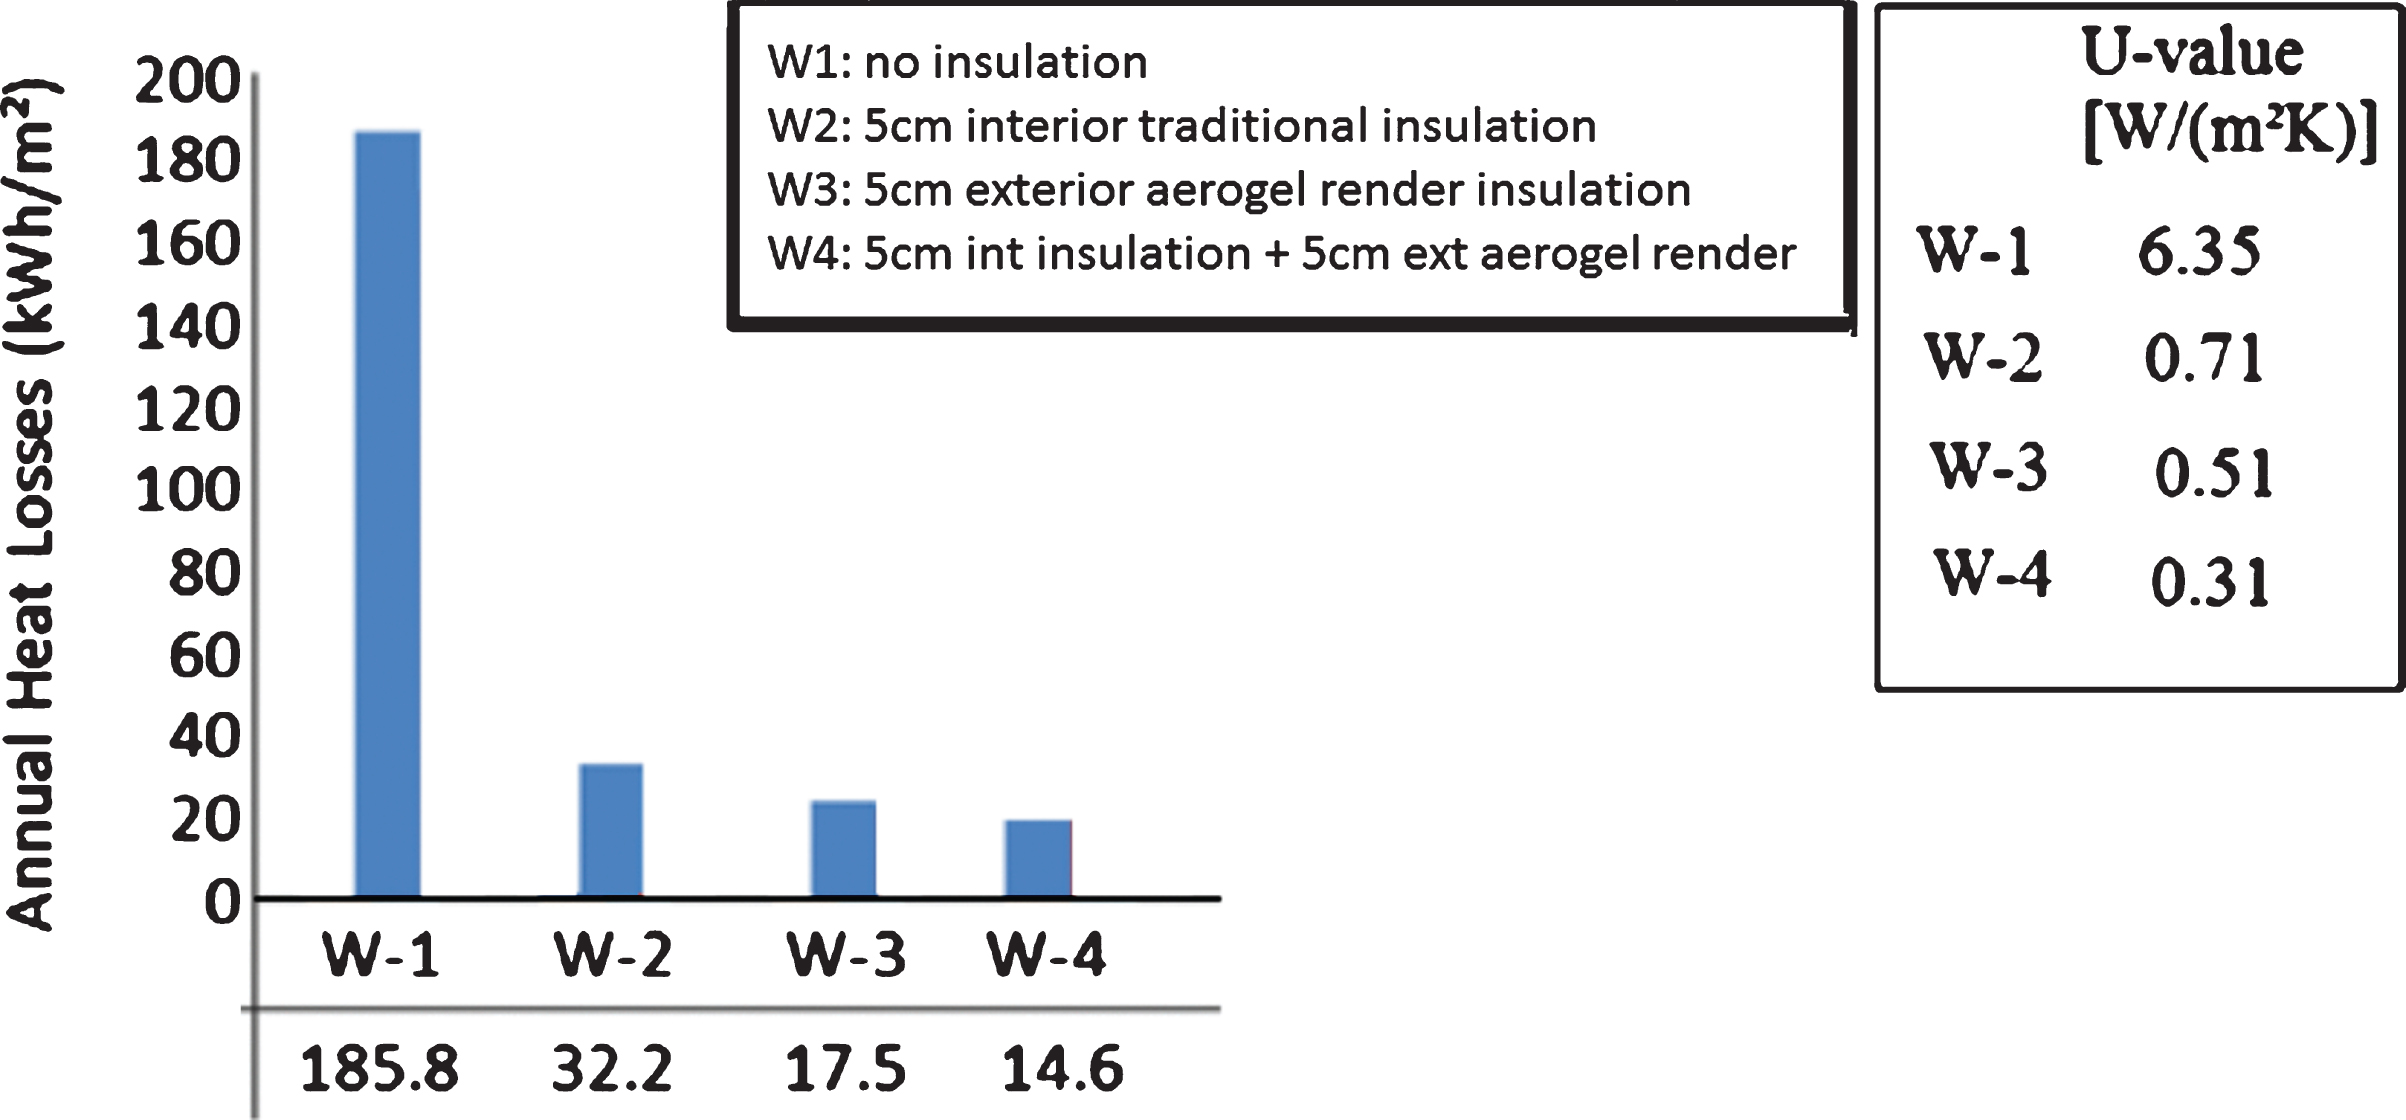 Wall heat losses for different insulation configurations and materials.